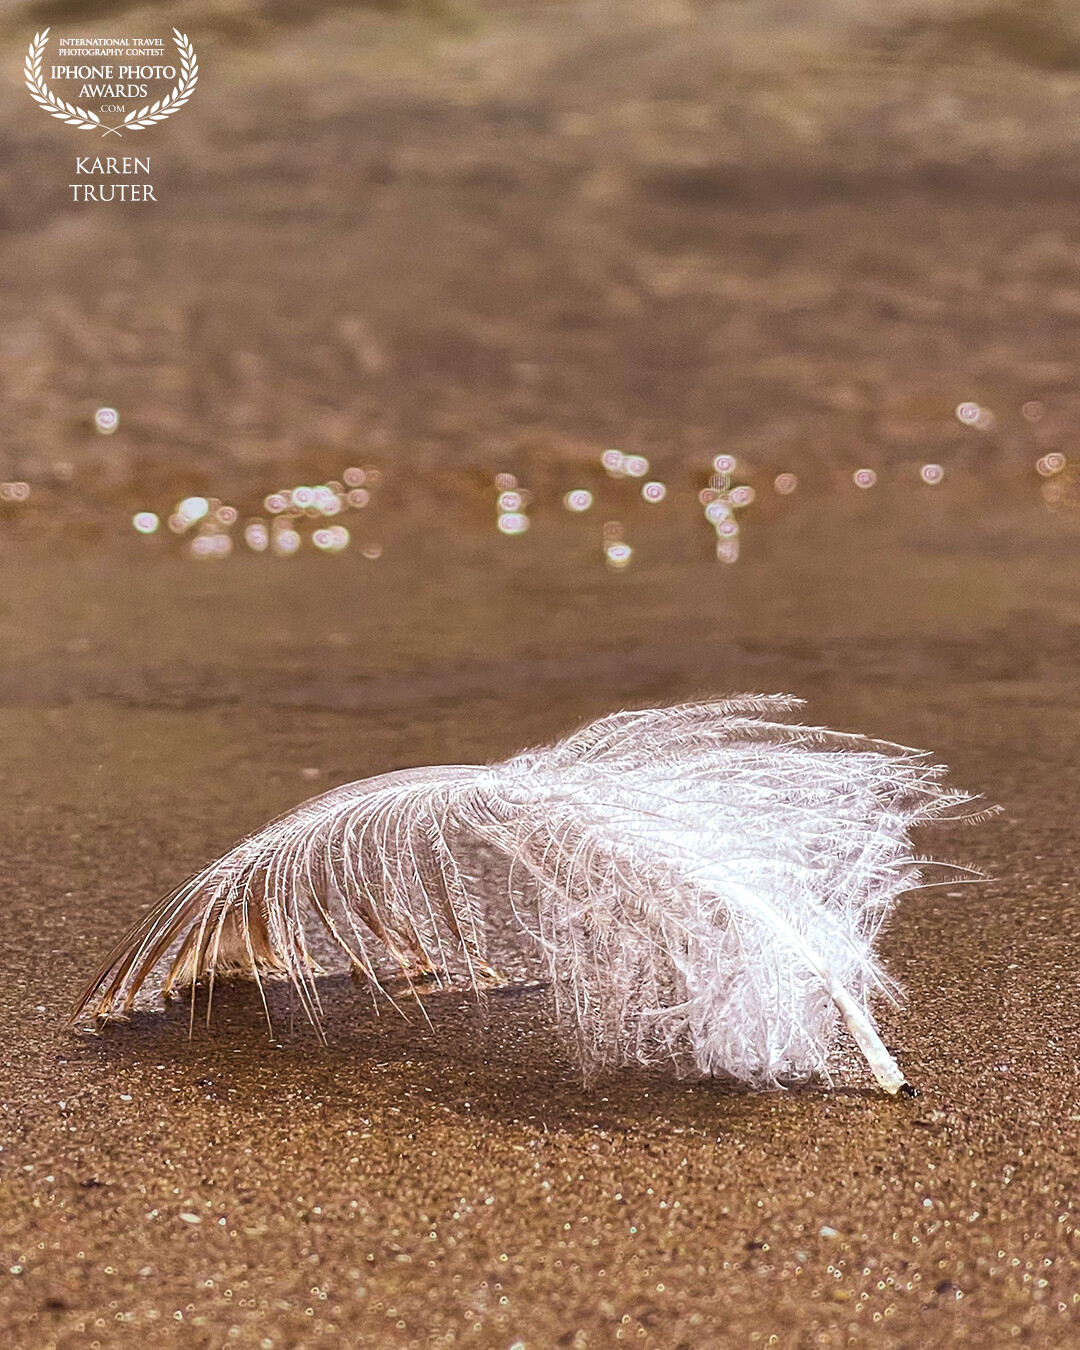 The small soft feather, abandoned plumage, lay still in the wet sand. The fine hairs on each spine still fresh, not damaged from its fall, nor from the water lapping along the shore. <br />
Handheld focus at 2.5x IPhone 12 Pro Max